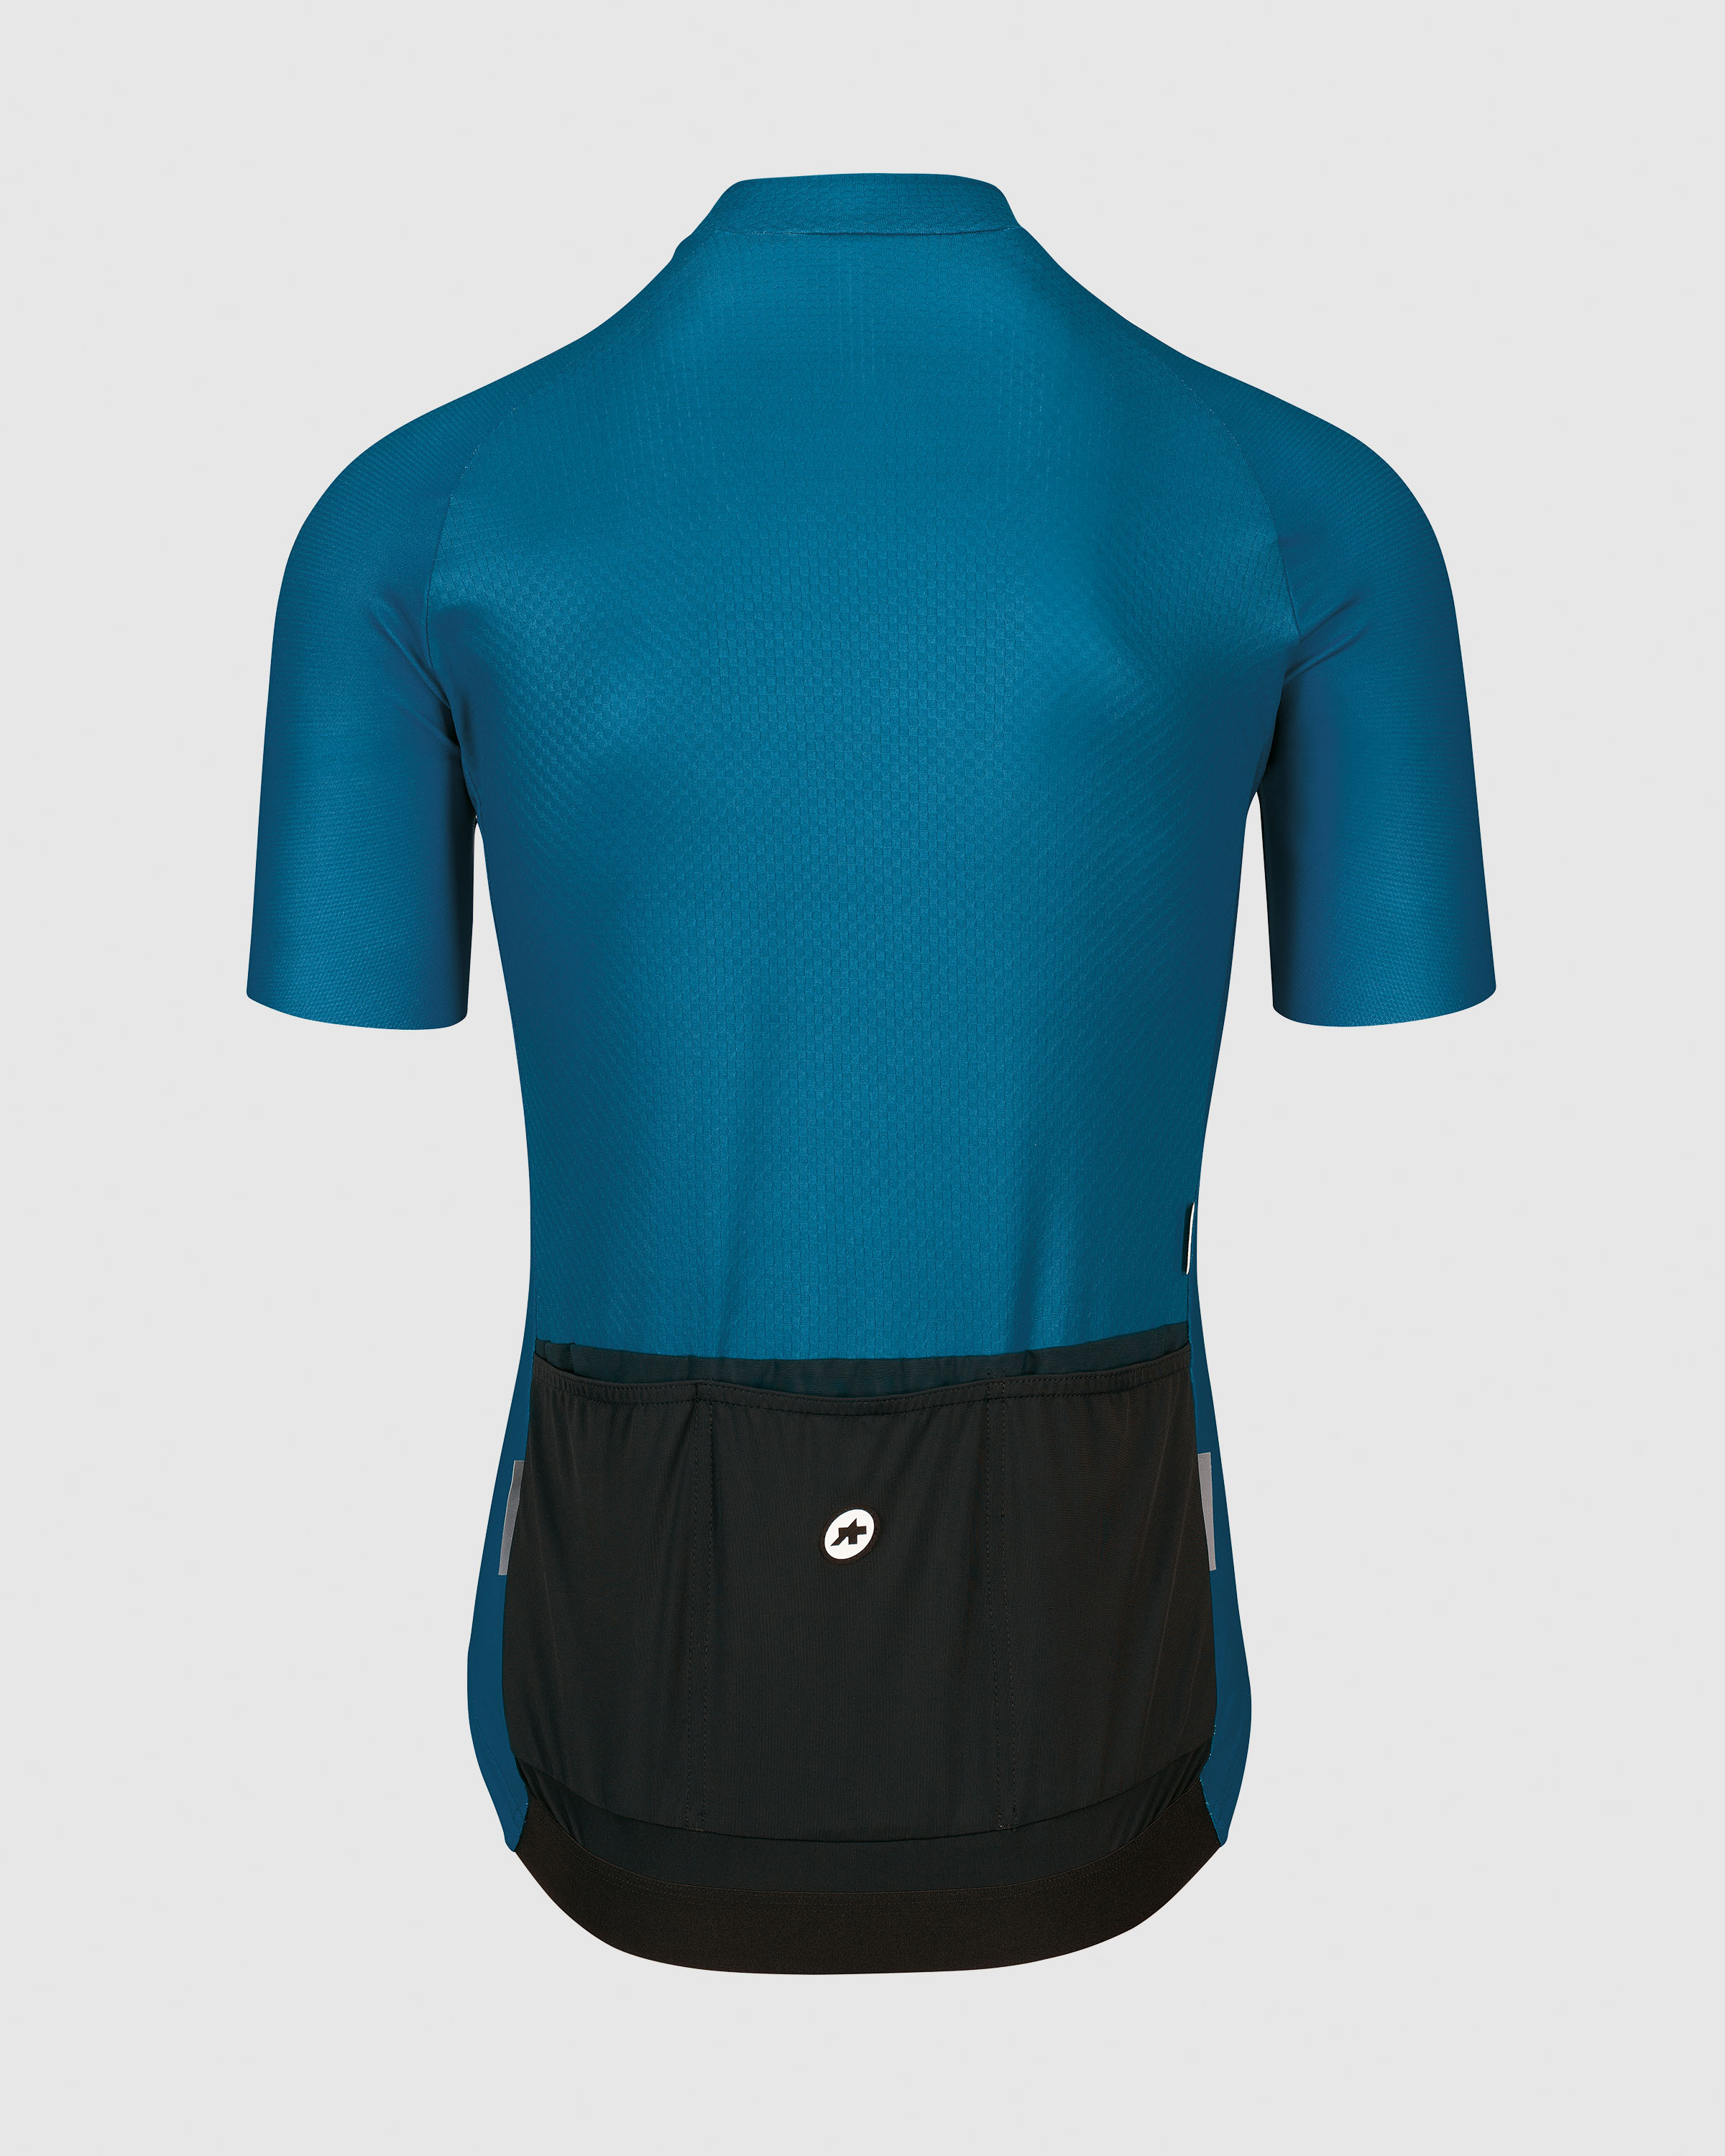 MILLE GT Jersey c2 - ASSOS Of Switzerland - Official Outlet